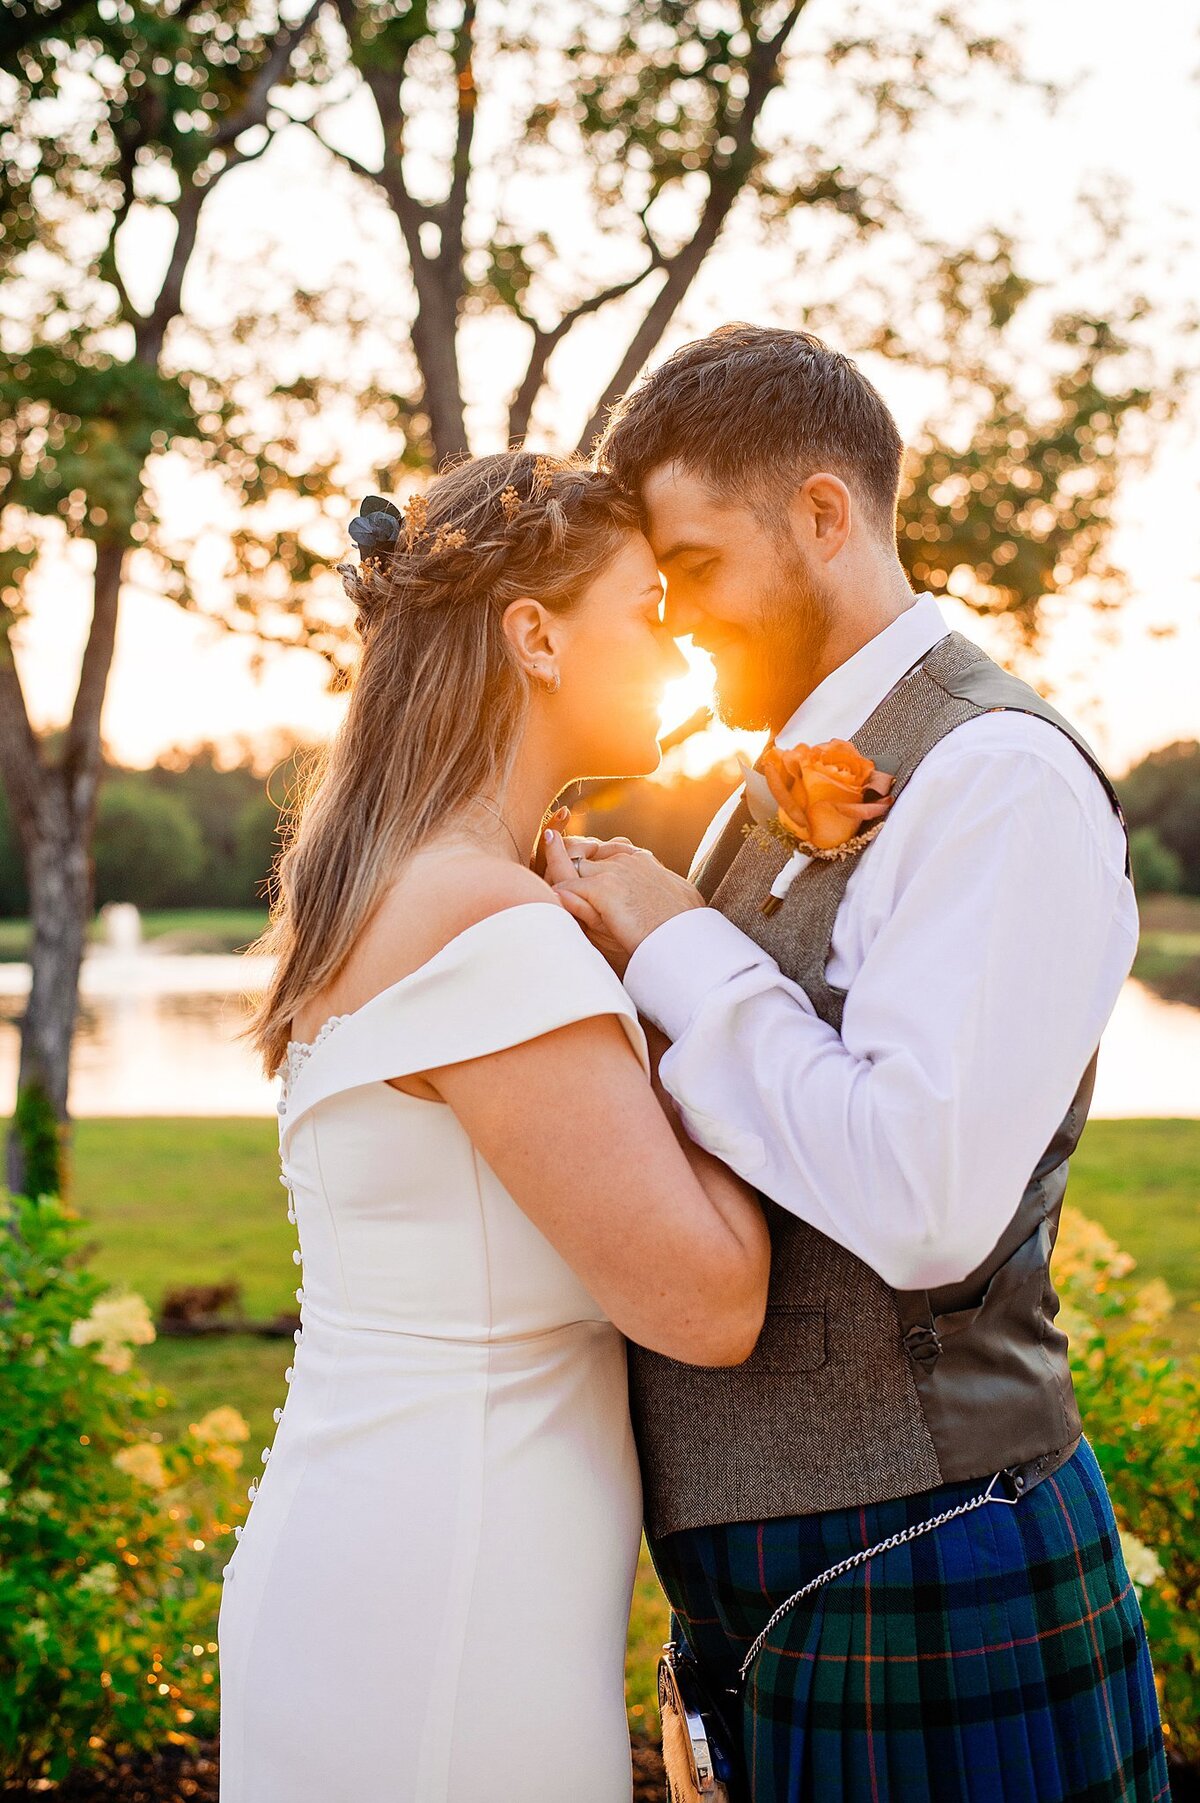 The bride, wearing a fitted gown with off the shoulder sleeves and flowers in her hair leans in to kiss the groom. The groom is wearing a gray vest, a white shirt and a blue and green kilt with sporran. He leans in to kiss the bride lakeside as the sun sets behind them at Sugarfoot.